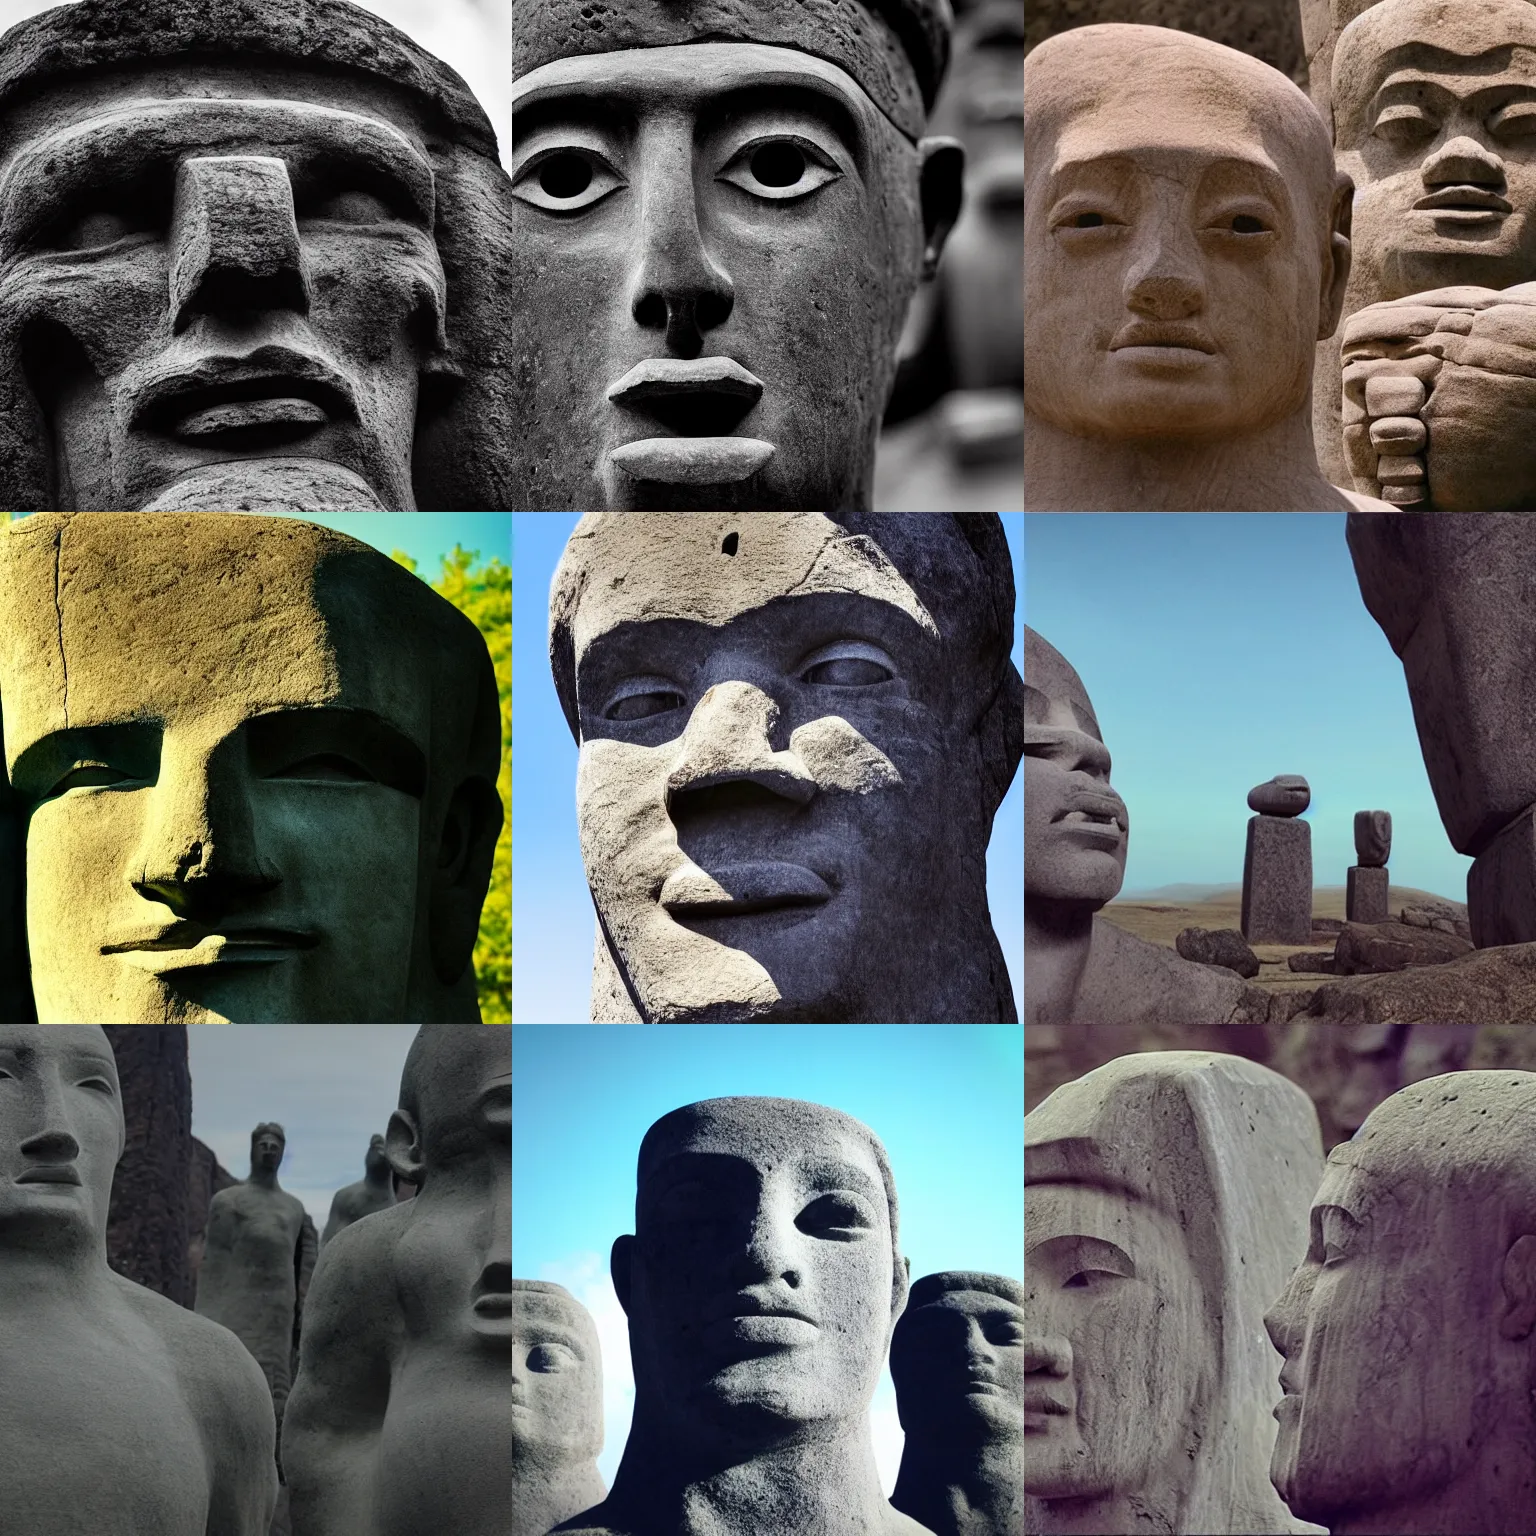 Prompt: 🗿🗿🗿🗿🗿🗿🗿🗿🗿🗿🗿🗿🗿🗿🗿🗿🗿🗿🗿, cinematography made by 🗿